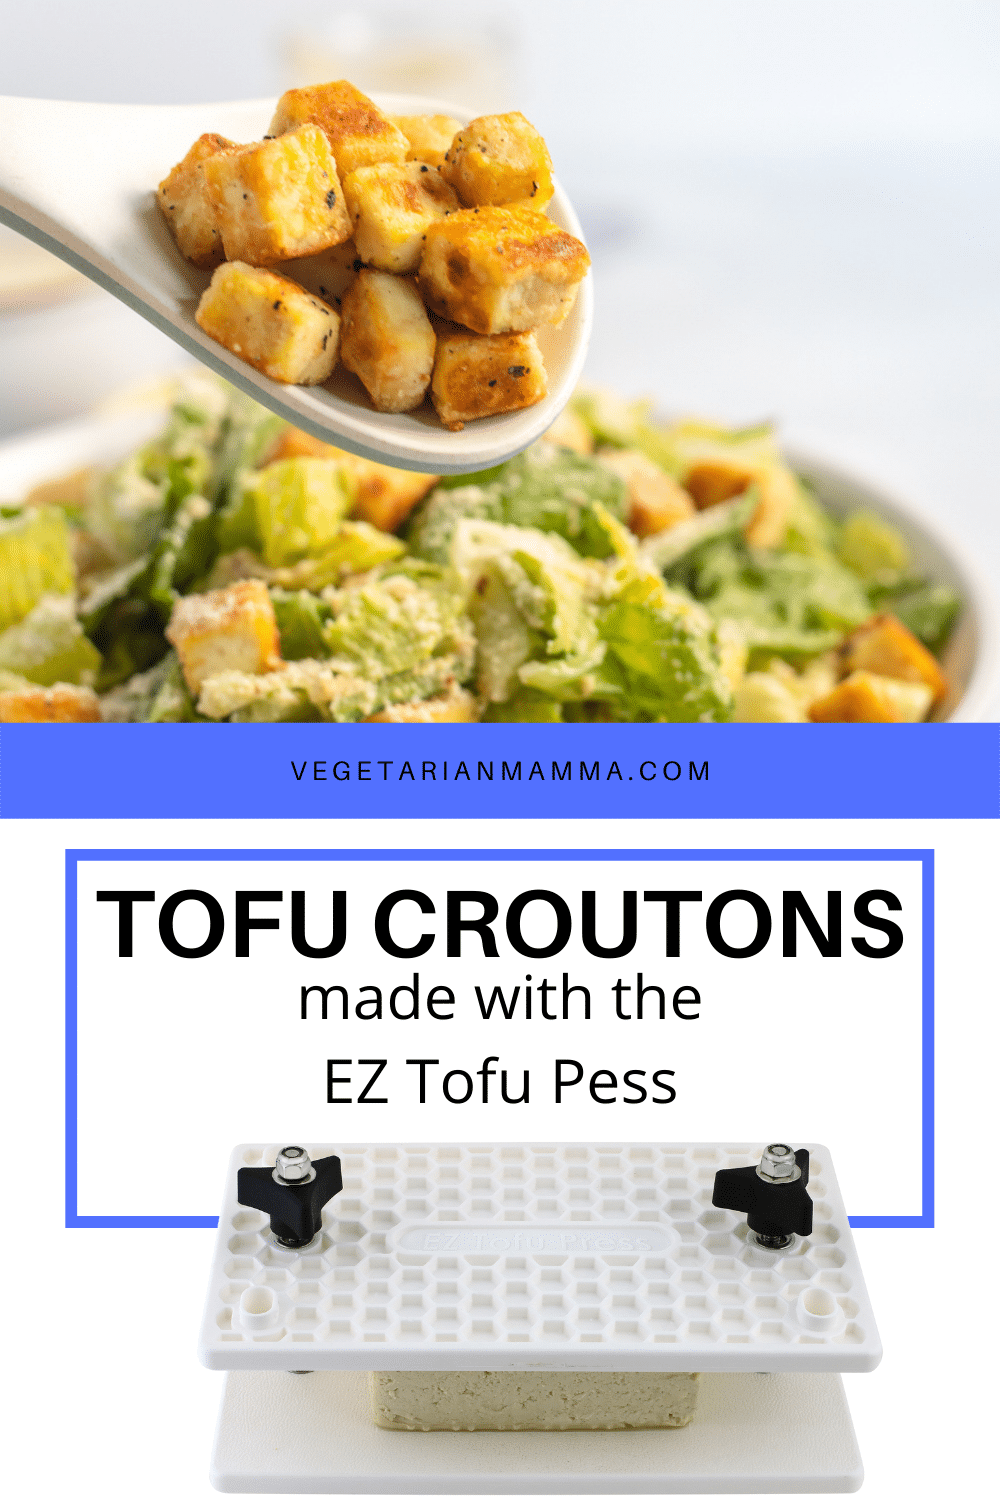 Tofu croutons are the crunchy topping your salads need! These simple vegan croutons are crispy and golden brown with a delicious creamy center.